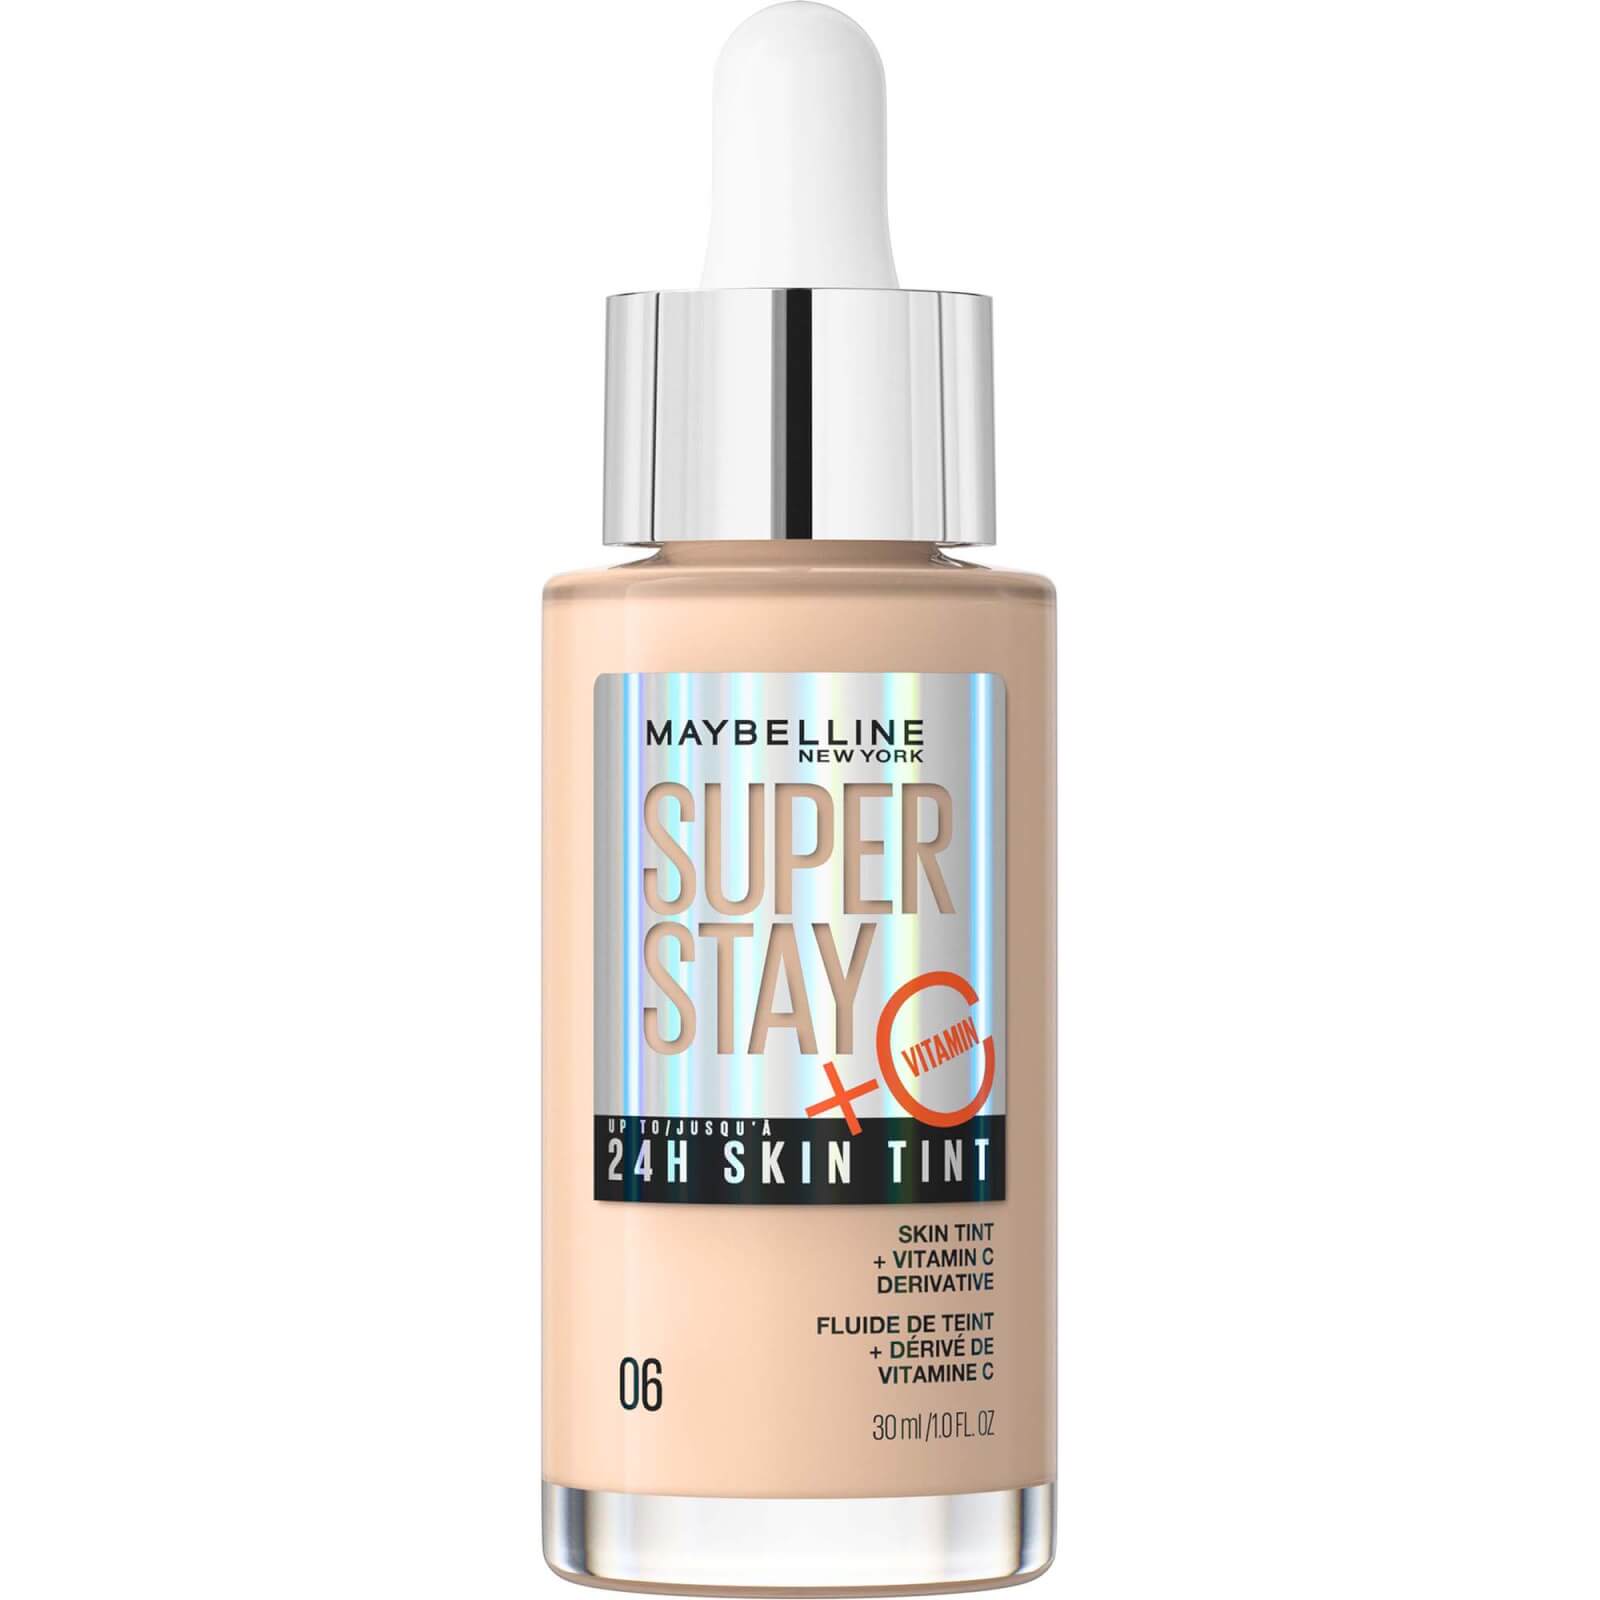 Maybelline Super Stay Up To 24h Skin Tint Foundation + Vitamin C 30ml (various Shades) - 6 In Neutral